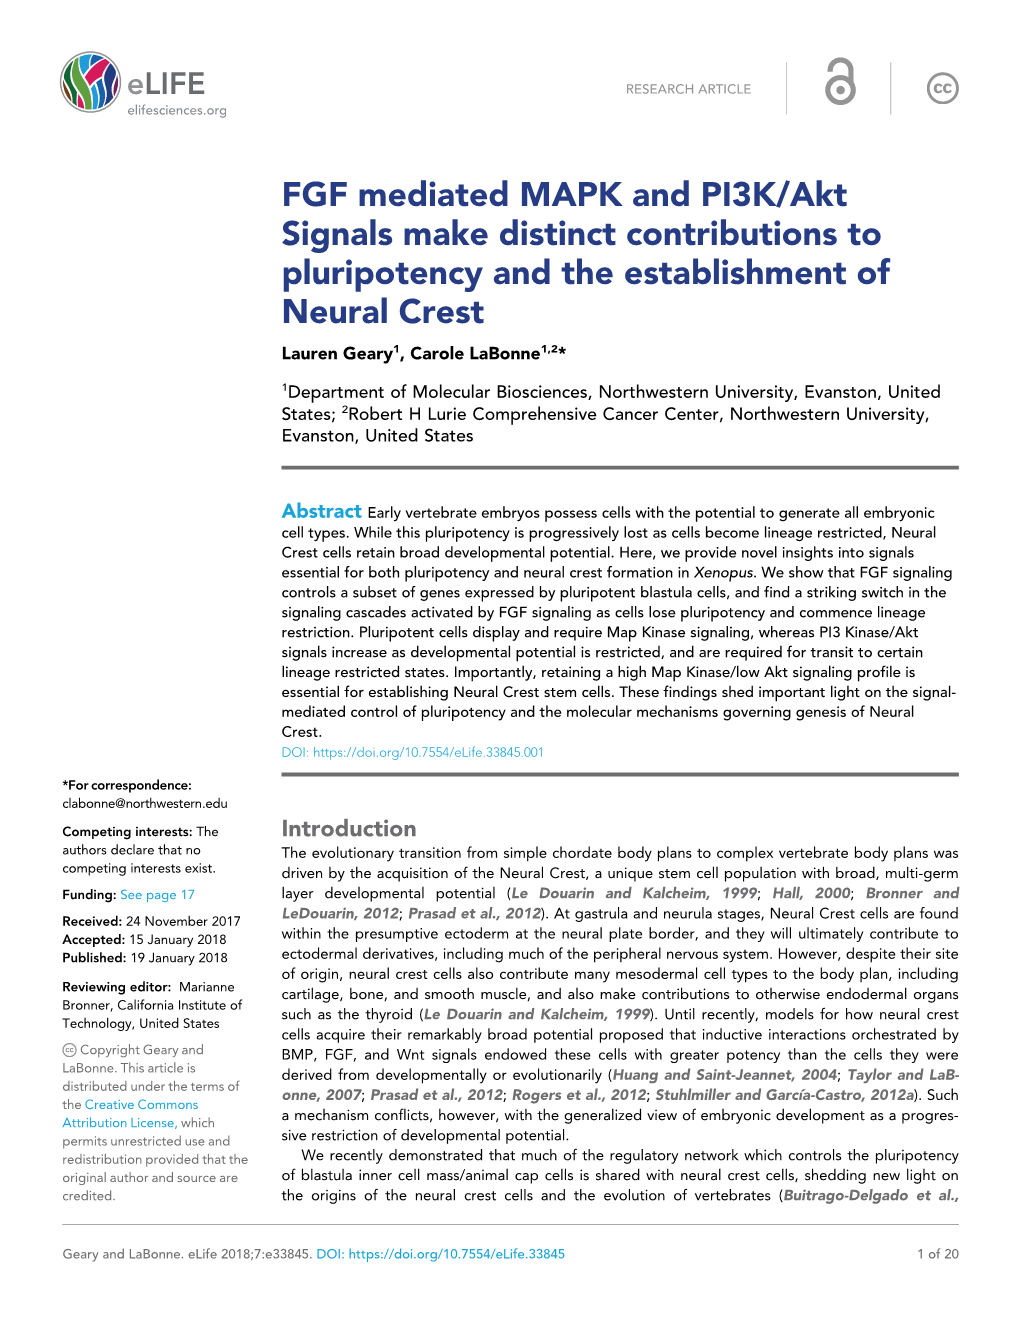 FGF Mediated MAPK and PI3K/Akt Signals Make Distinct Contributions to Pluripotency and the Establishment of Neural Crest Lauren Geary1, Carole Labonne1,2*